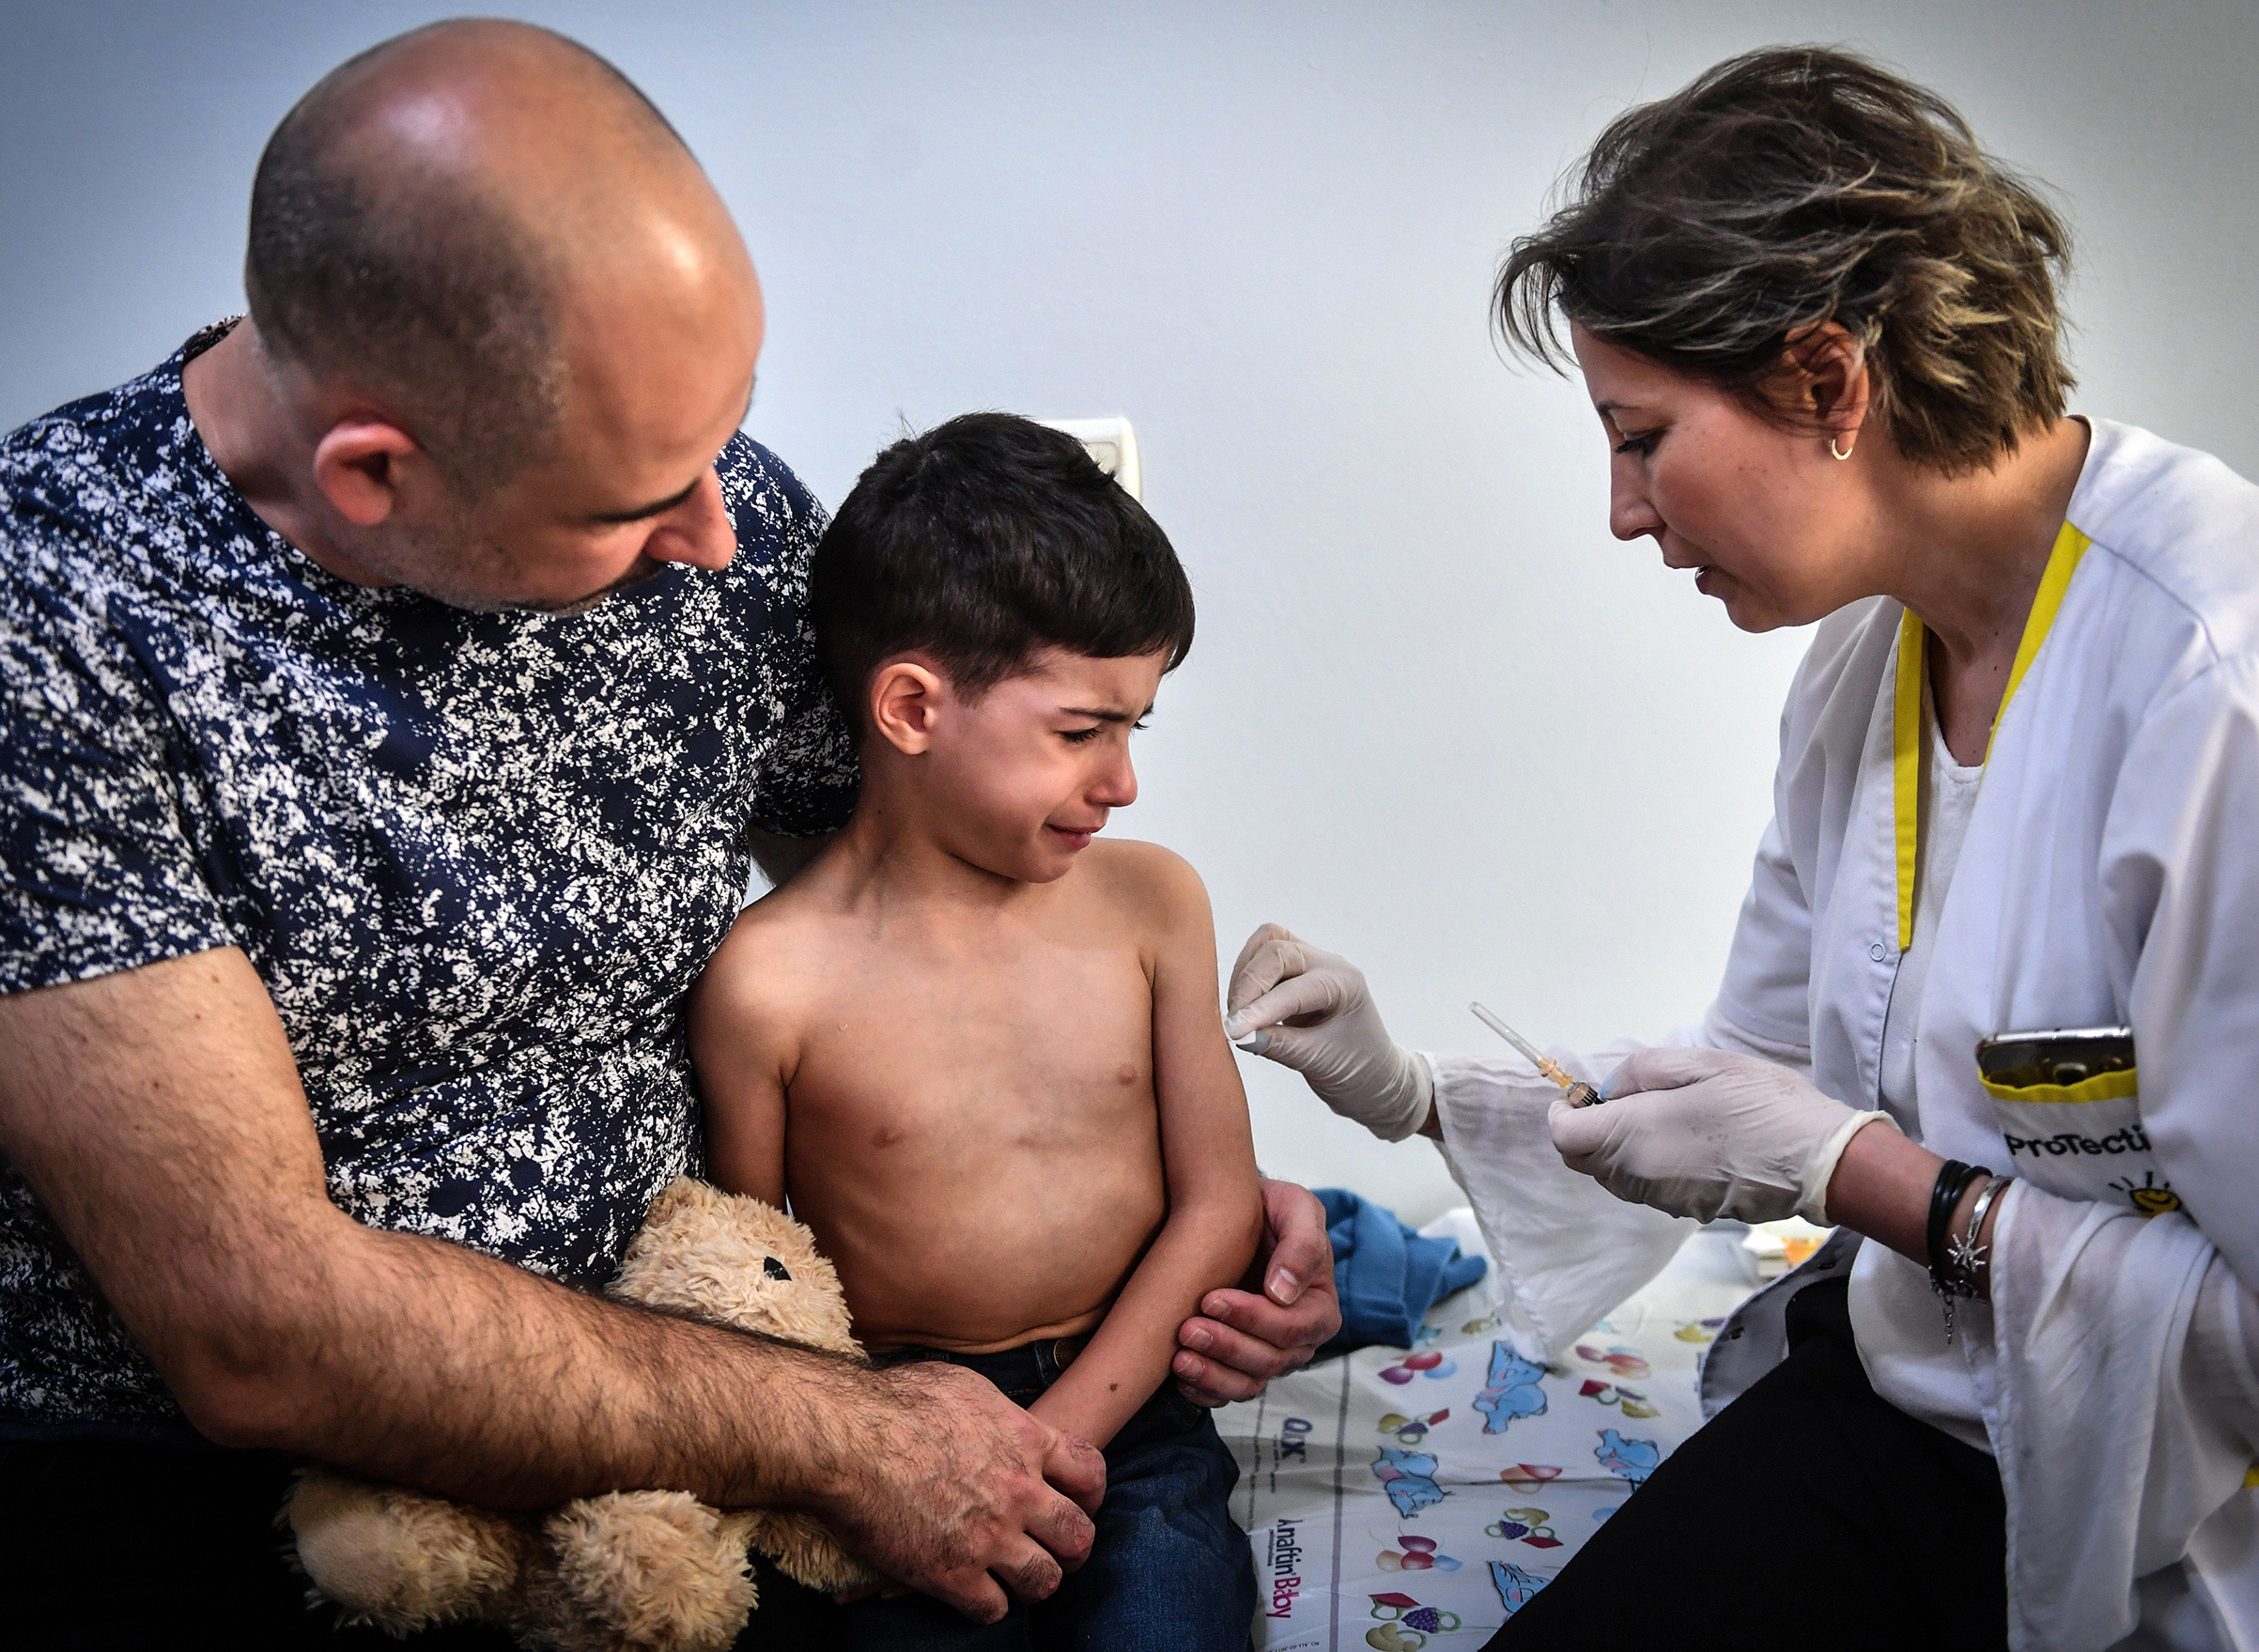 A child receives a vaccination against measles by a family physician on April 16, 2018 in the Romanian capital, Bucharest in Europe. (Daniel Mihailescu—AFP/Getty Images)